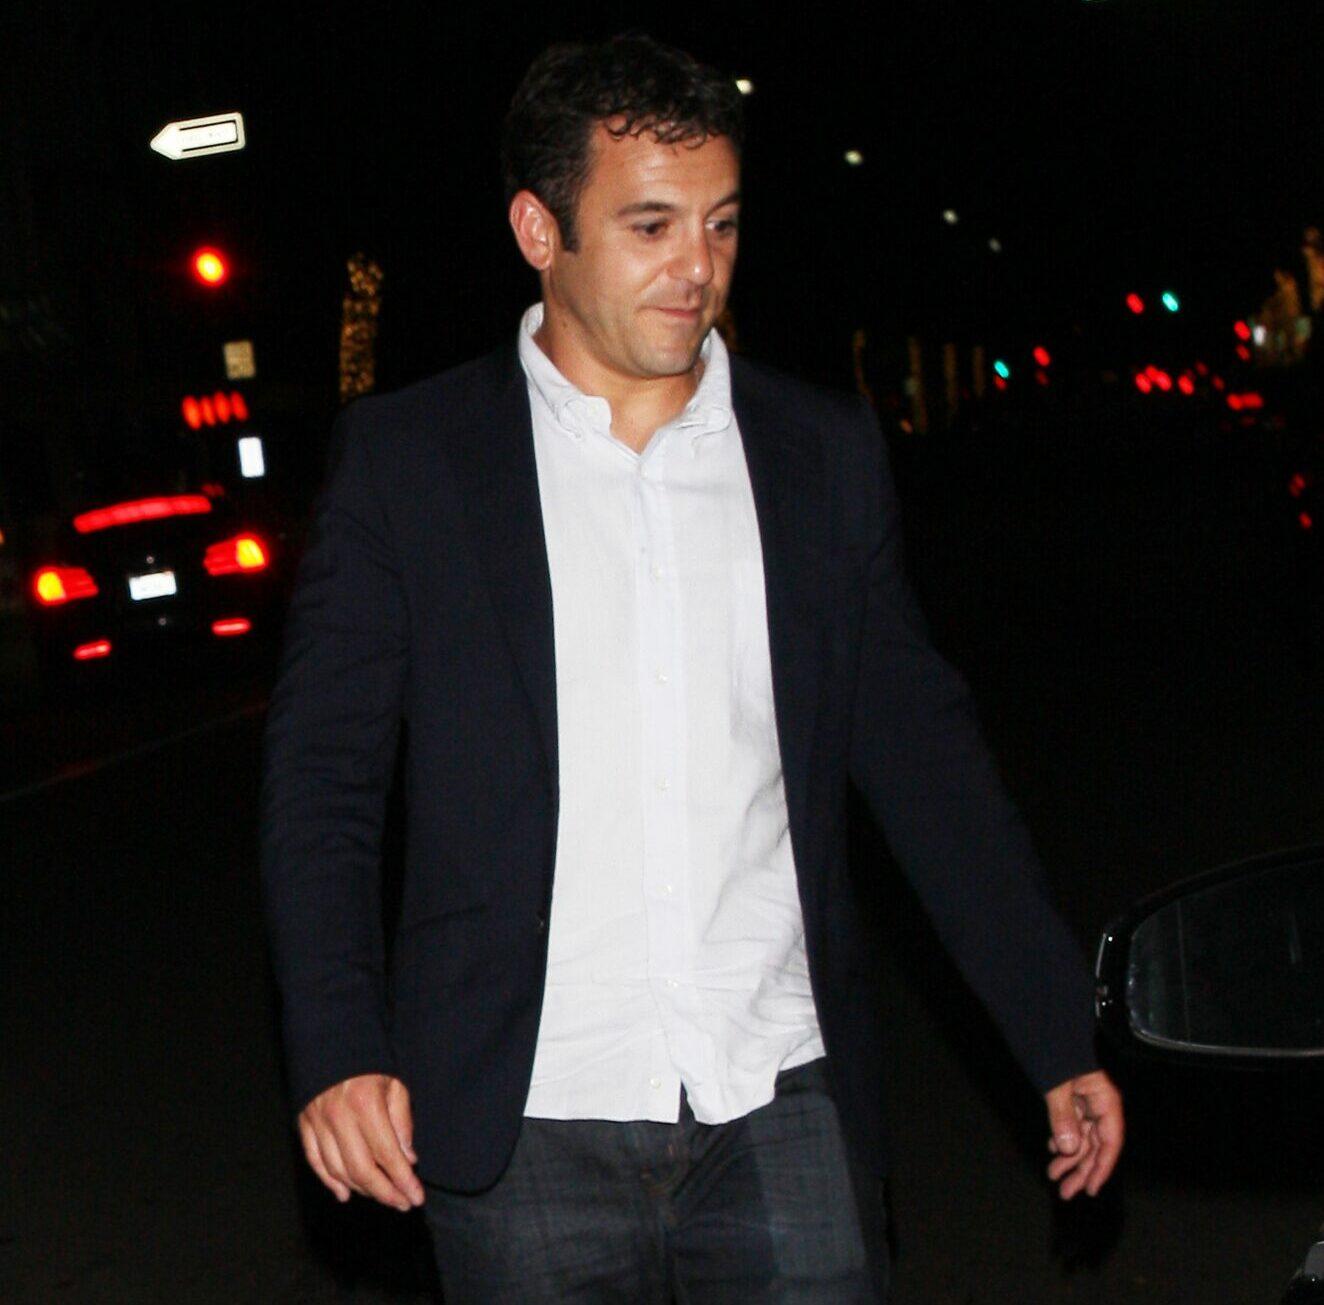 Actor Fred Savage is seen leaving Madeo restaurant after having dinner in Beverly Hills.